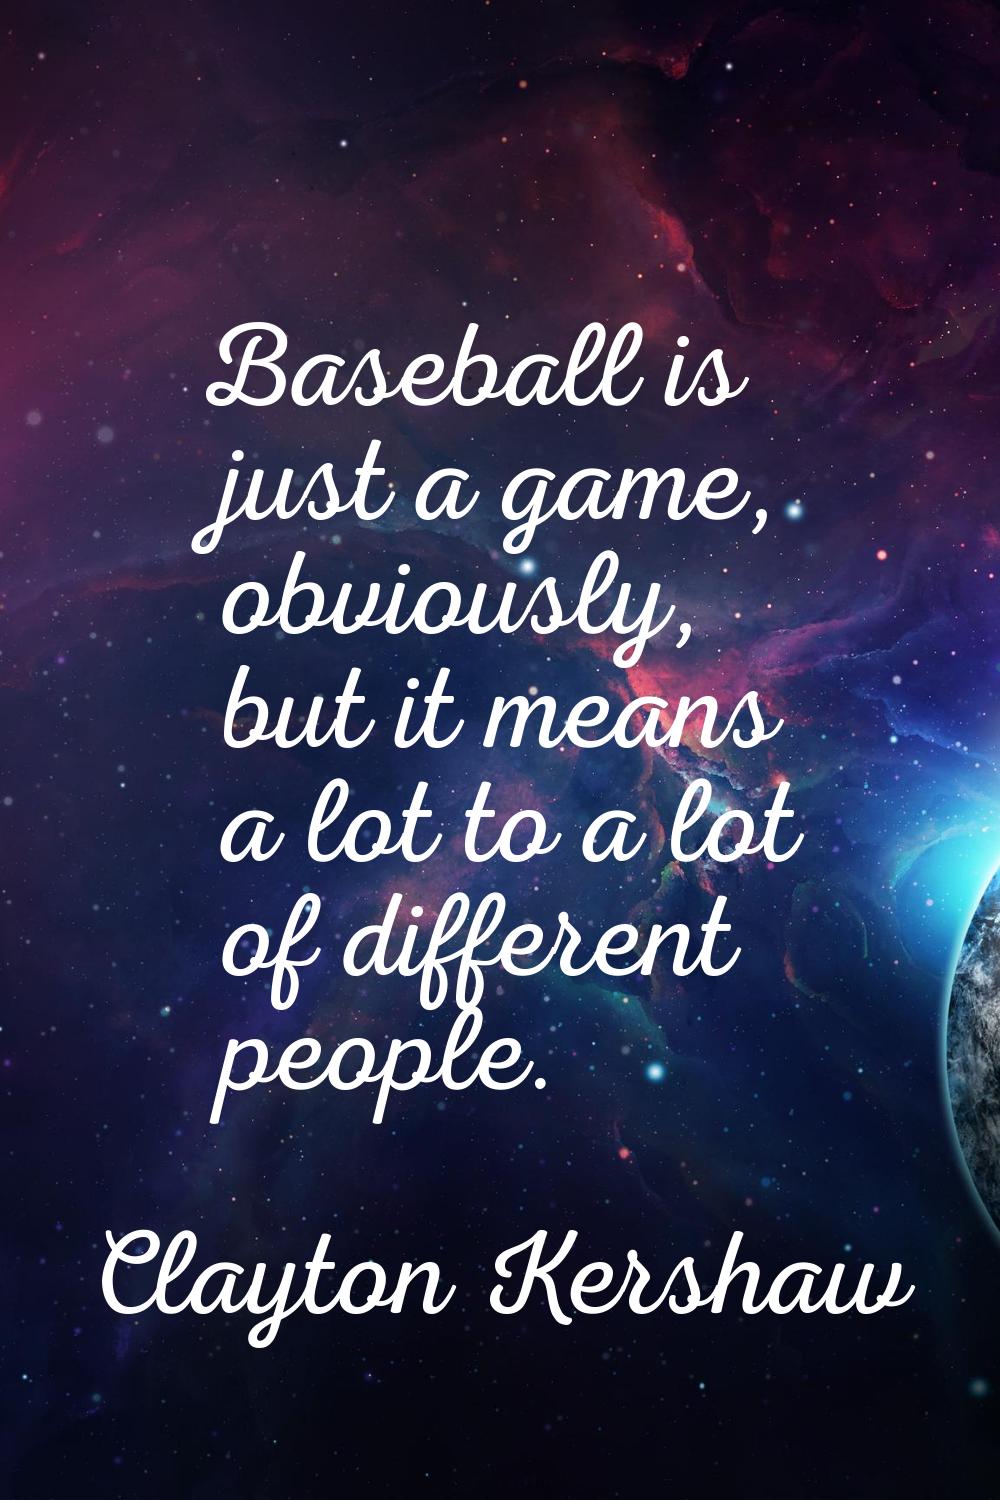 Baseball is just a game, obviously, but it means a lot to a lot of different people.